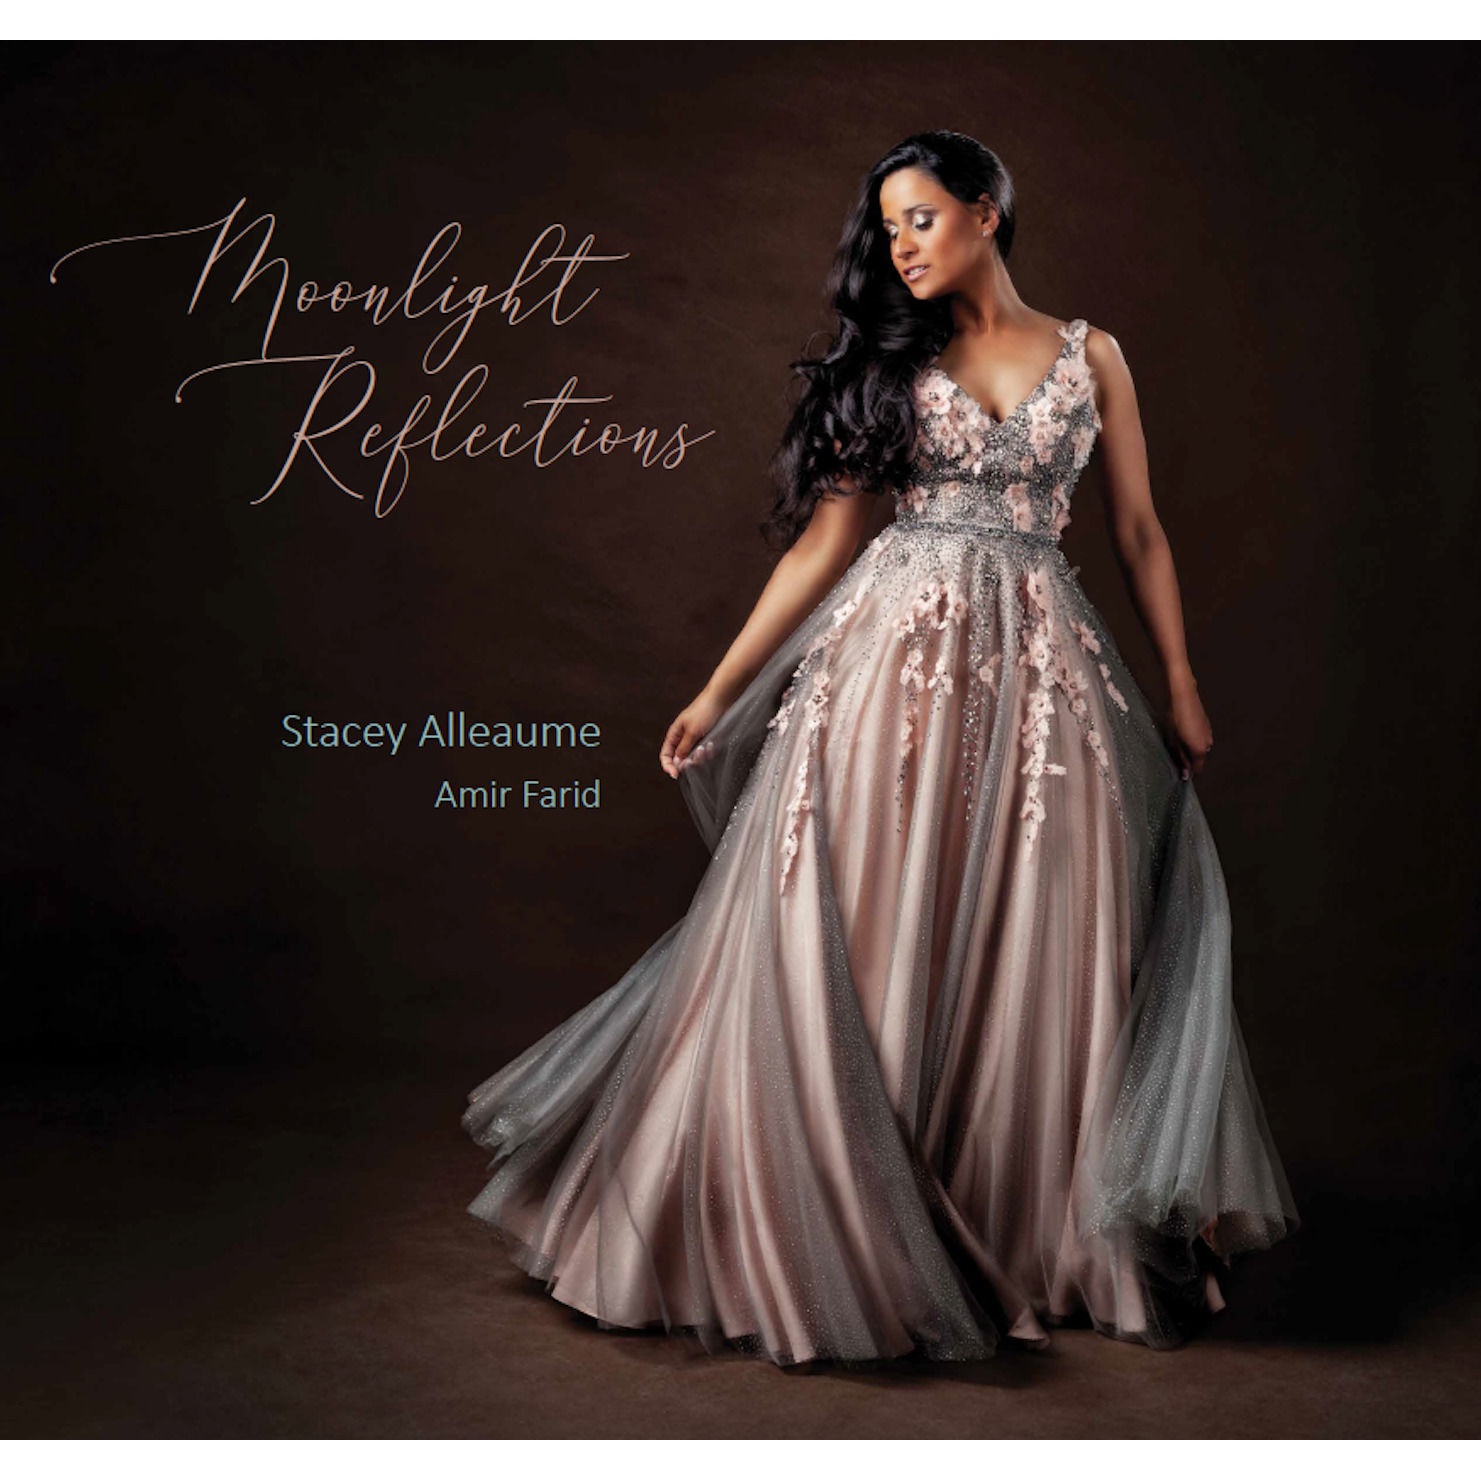 Stacey Alleaume & Amir Farid – Moonlight Reflections (2021) [FLAC 24bit/48kHz]